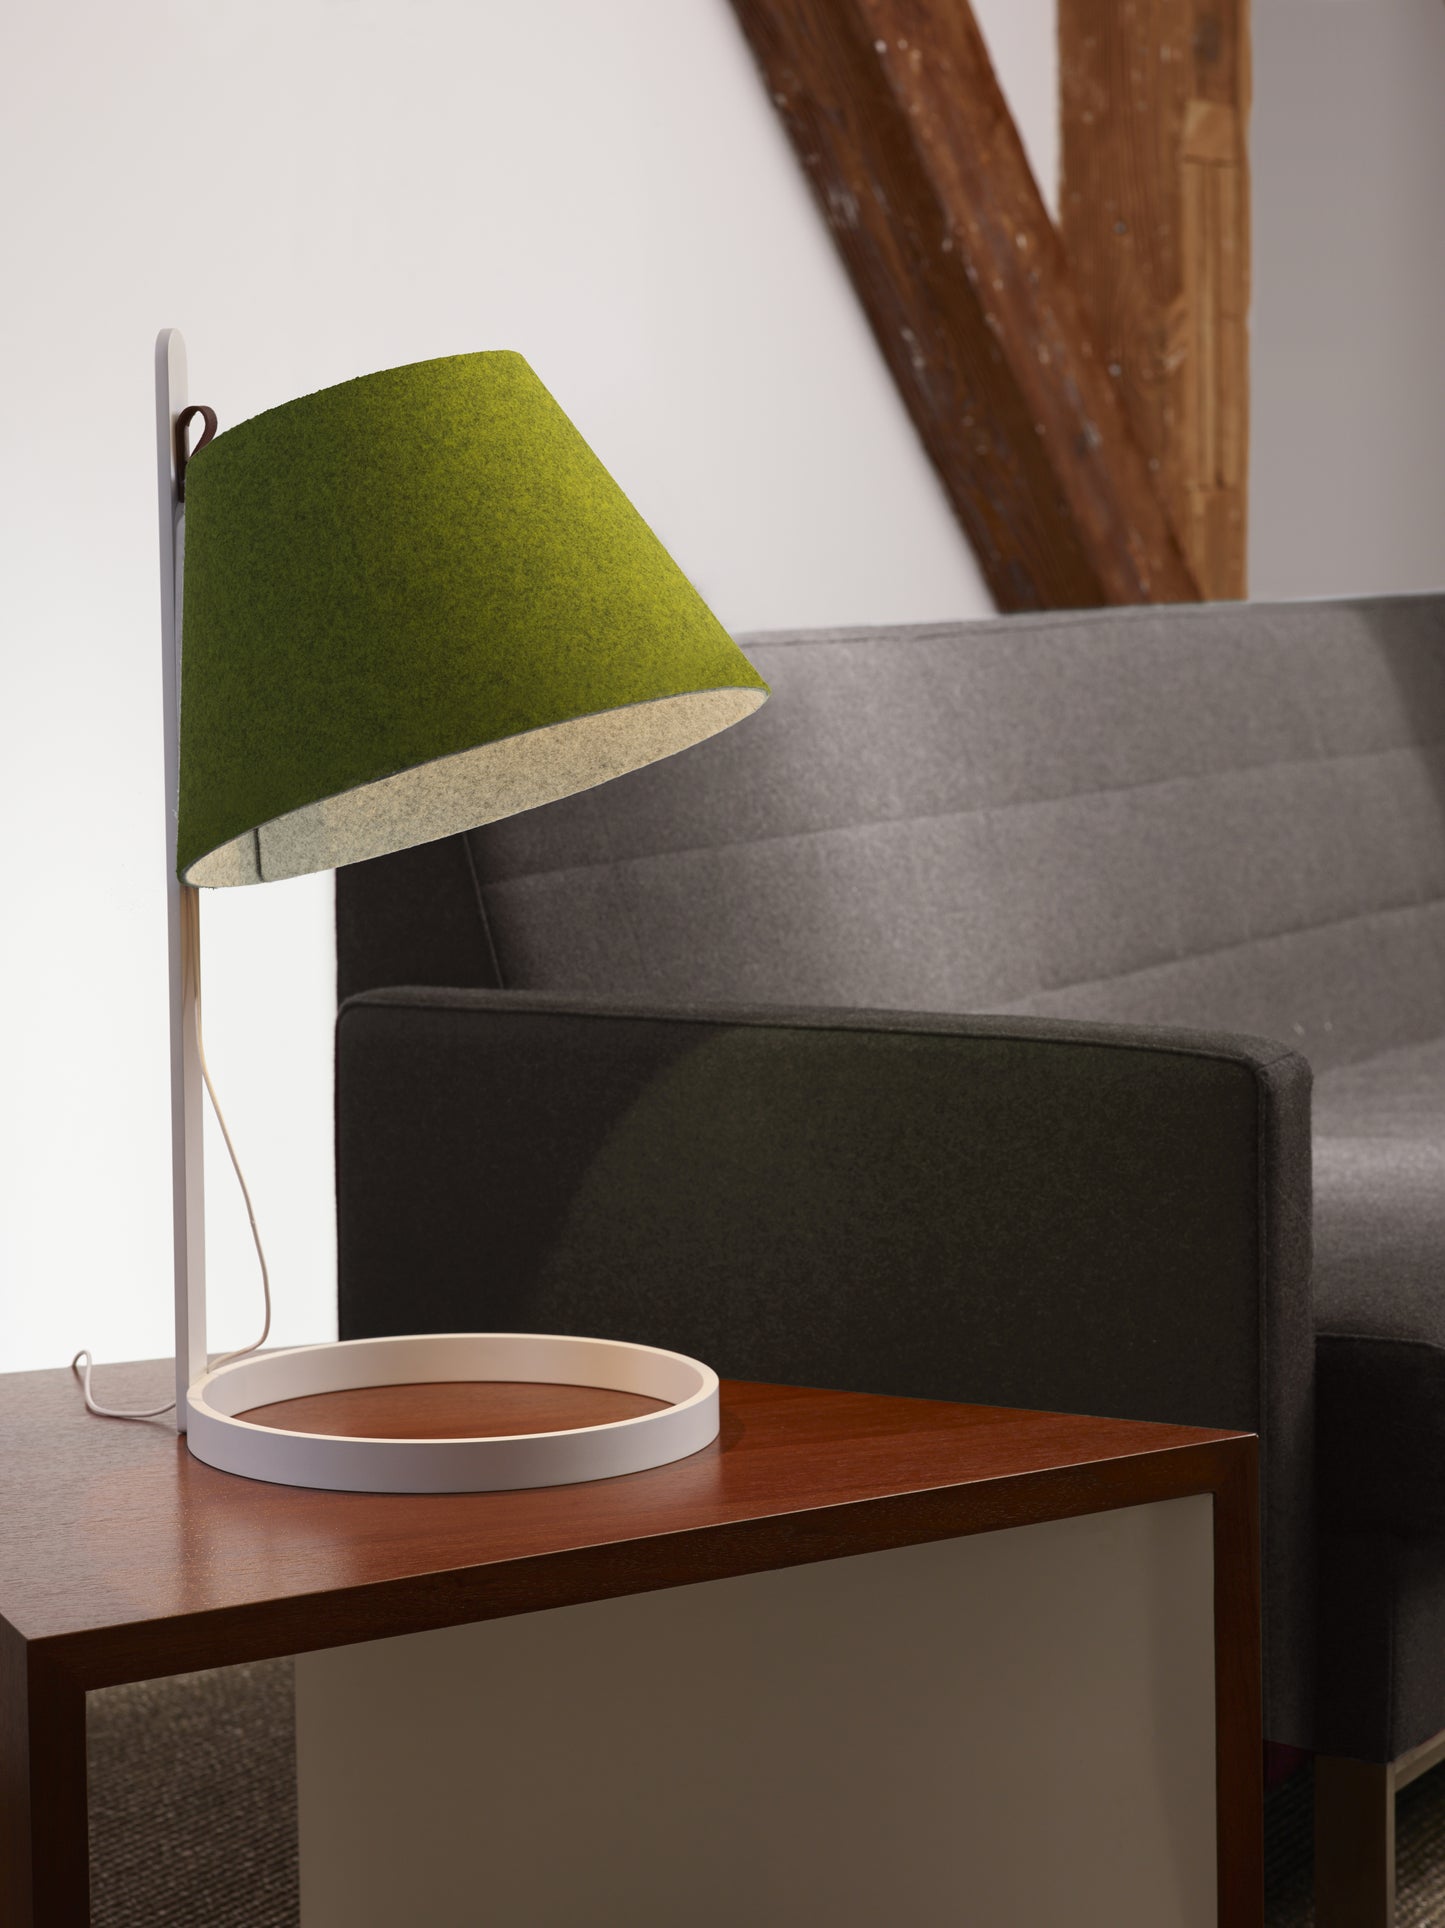 Lana Table Lamp by Pablo Designs